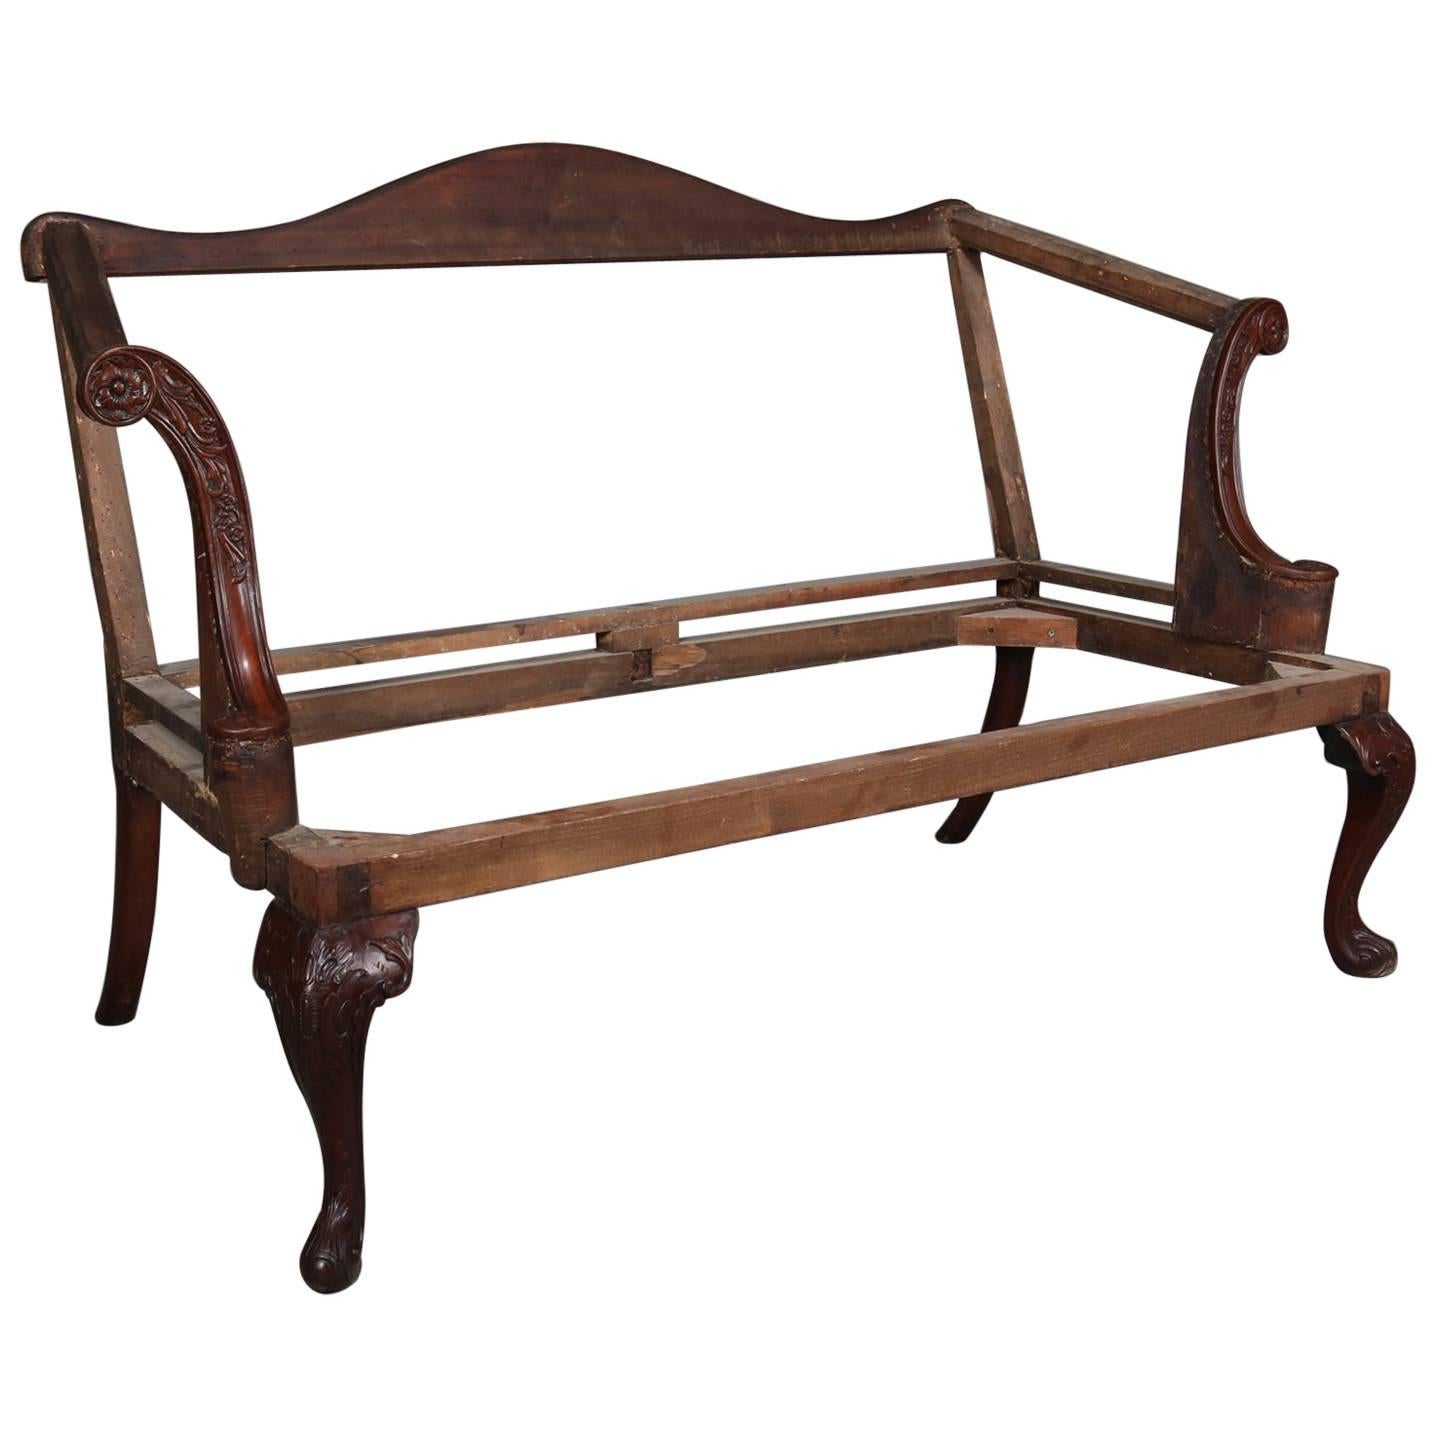 English Floral & Foliate Carved Mahogany Queen Anne Settee Frame, circa 1820